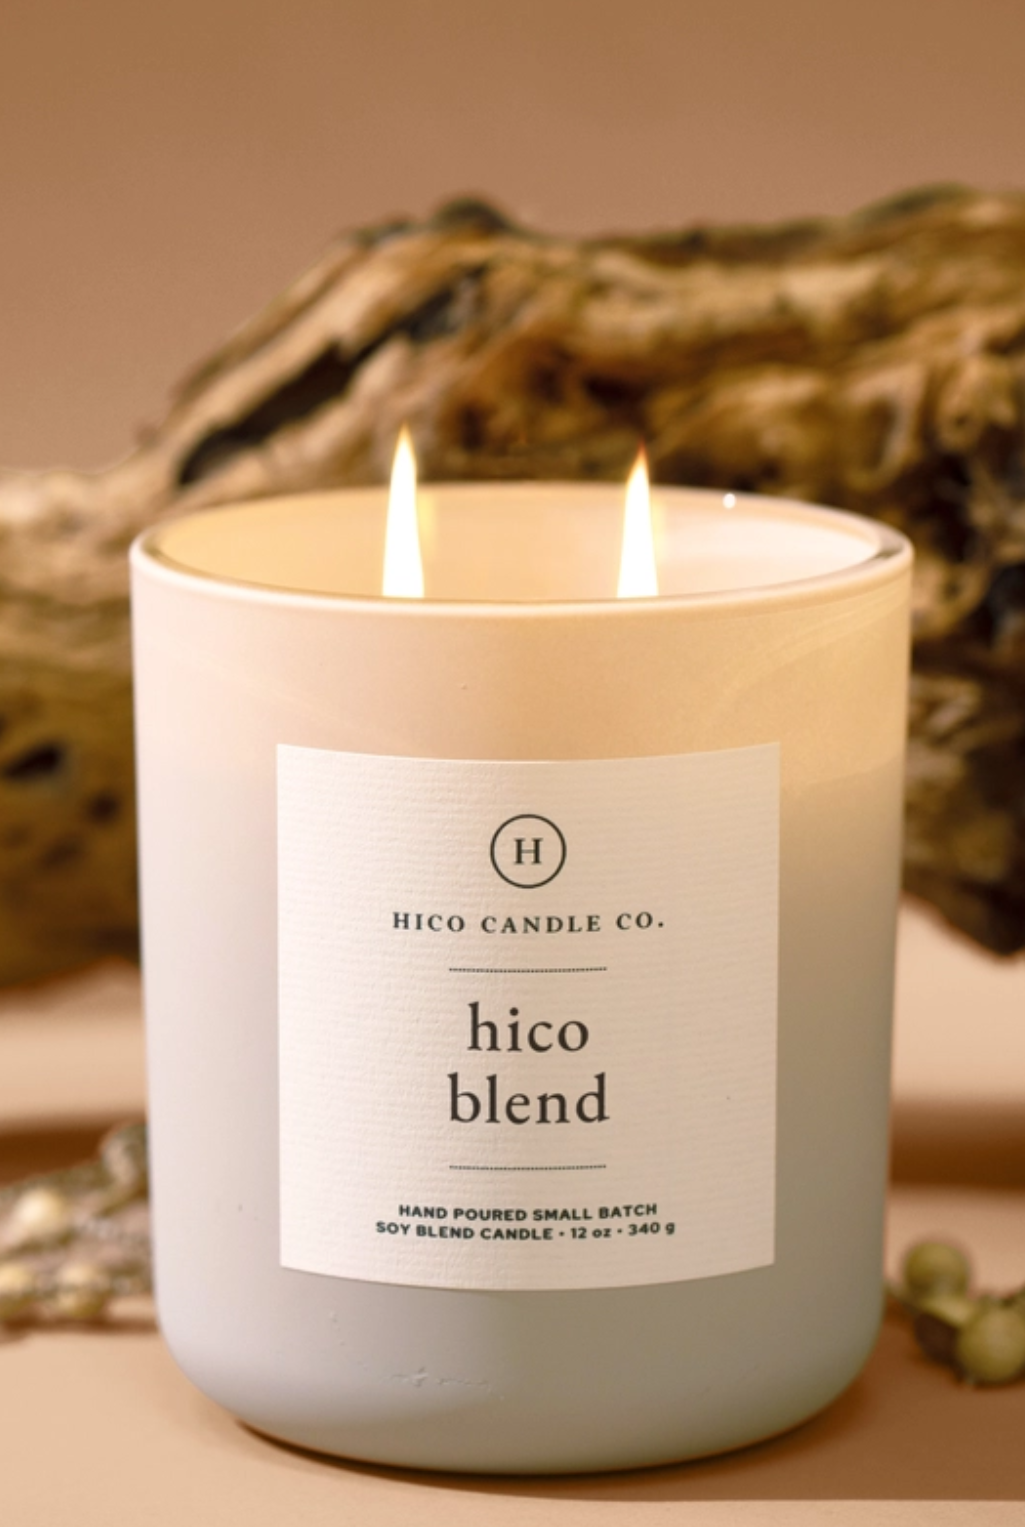 Hico Blend Candle